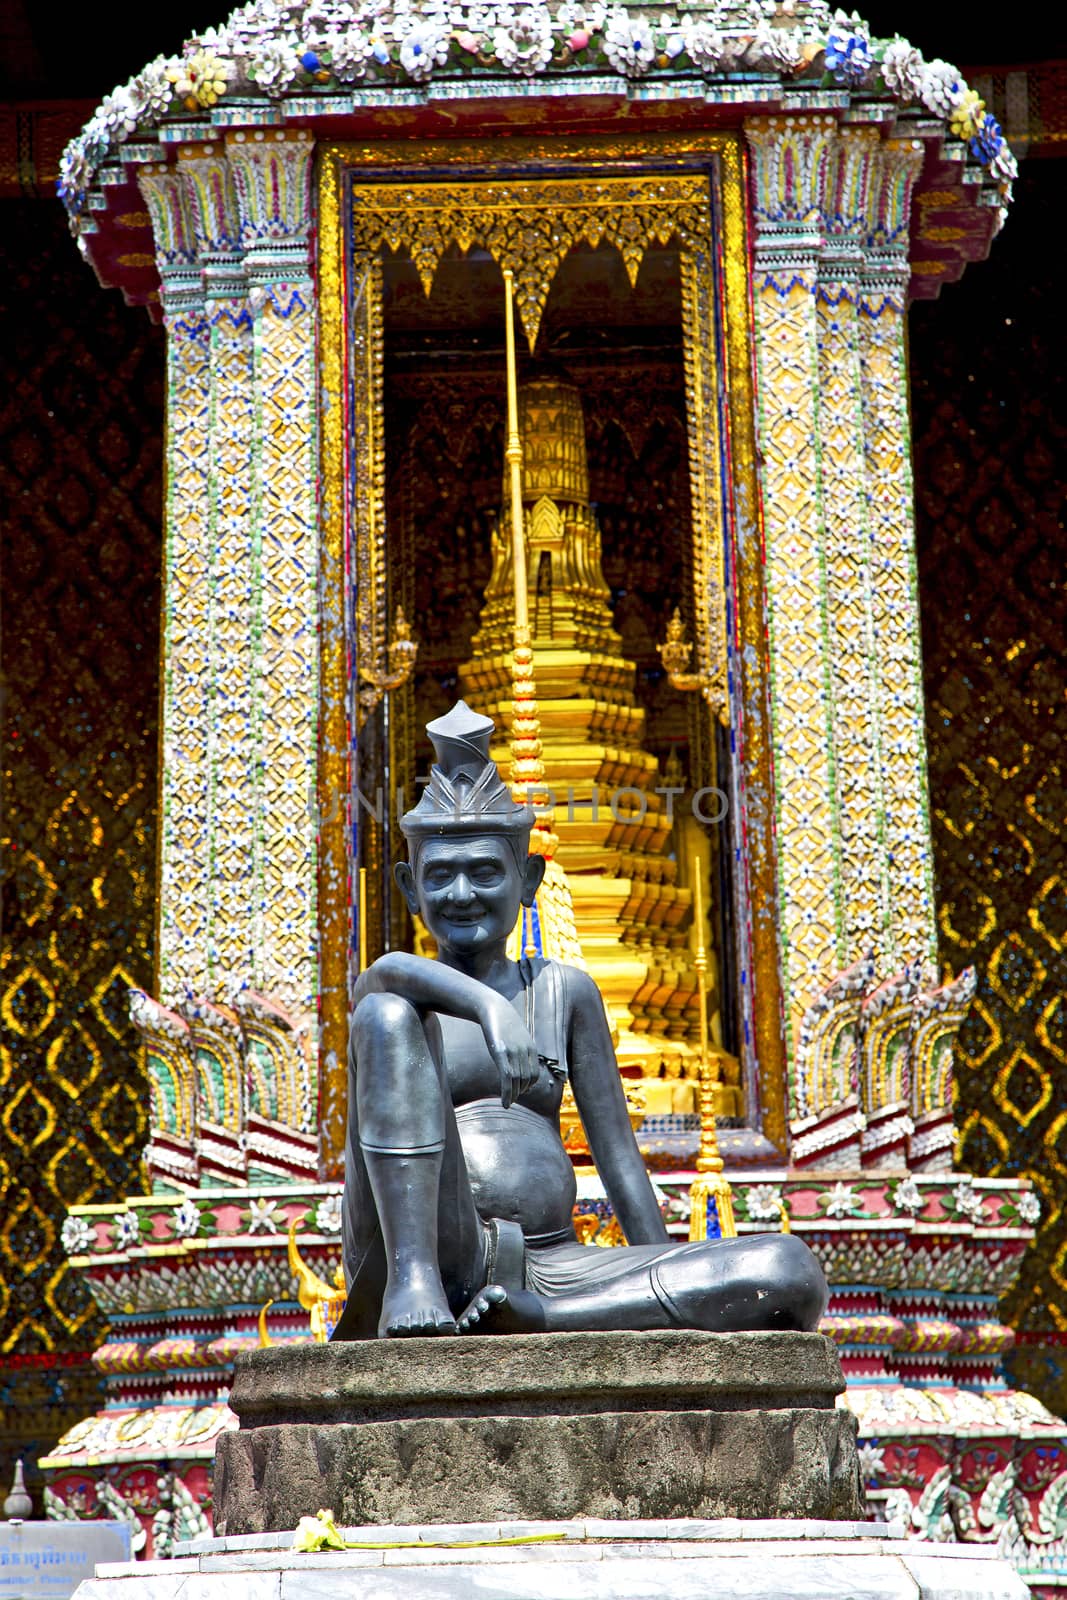 siddharta   in   temple   asia   thailand abstract   step     wa by lkpro